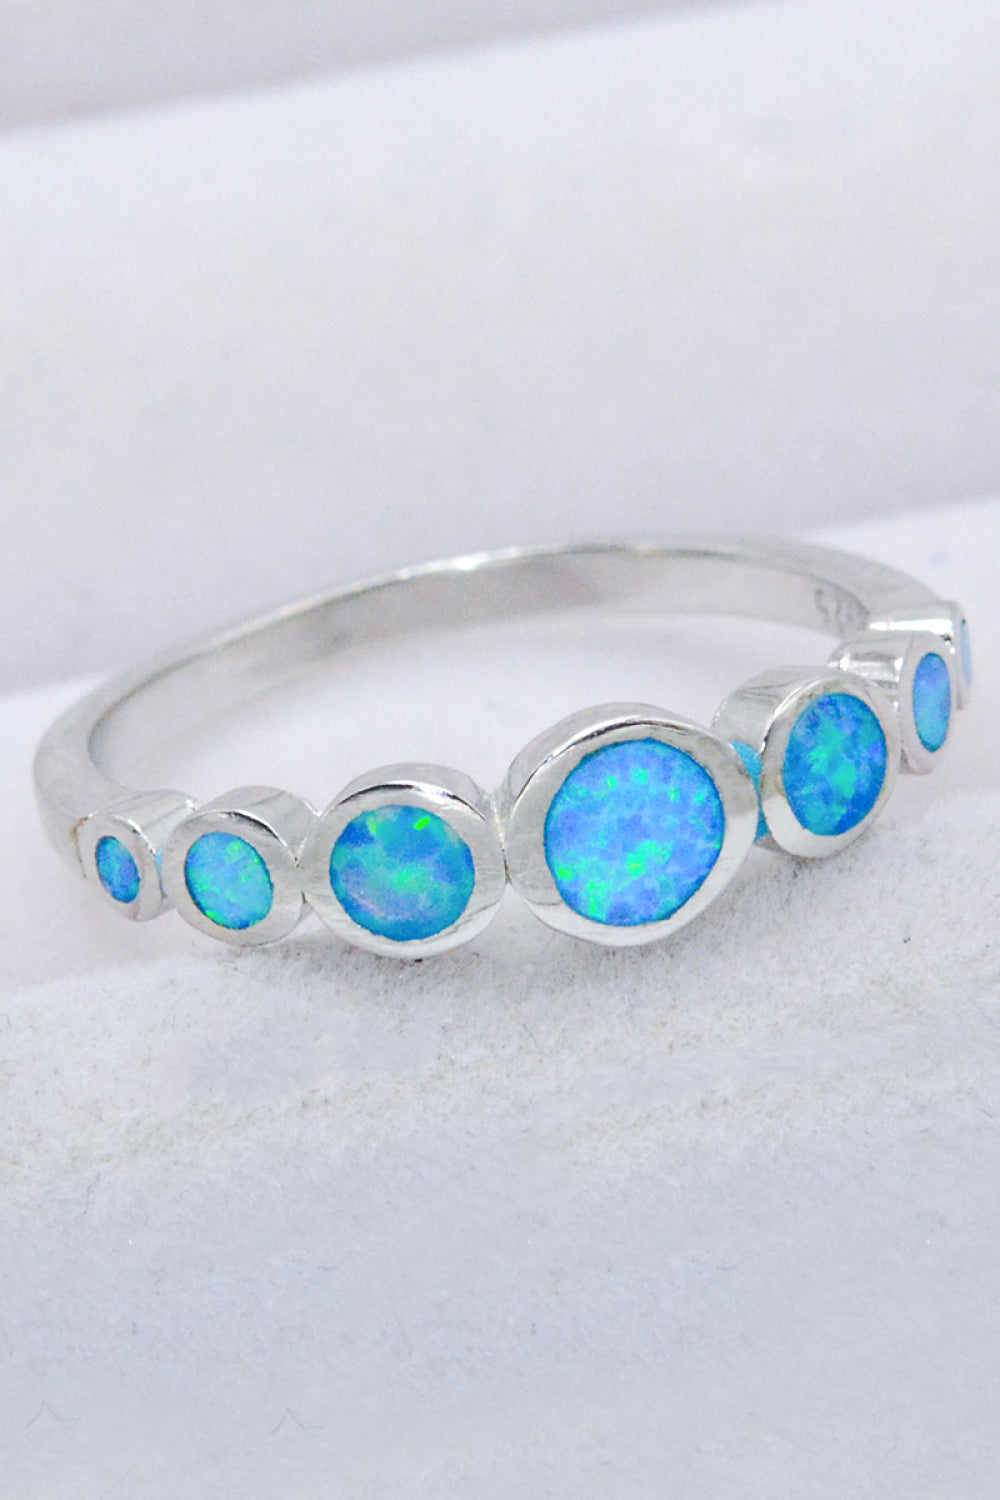 925 Sterling Silver Multi-Opal Ring - Tophatter Shopping Deals - Electronics, Jewelry, Auction, App, Bidding, Gadgets, Fashion